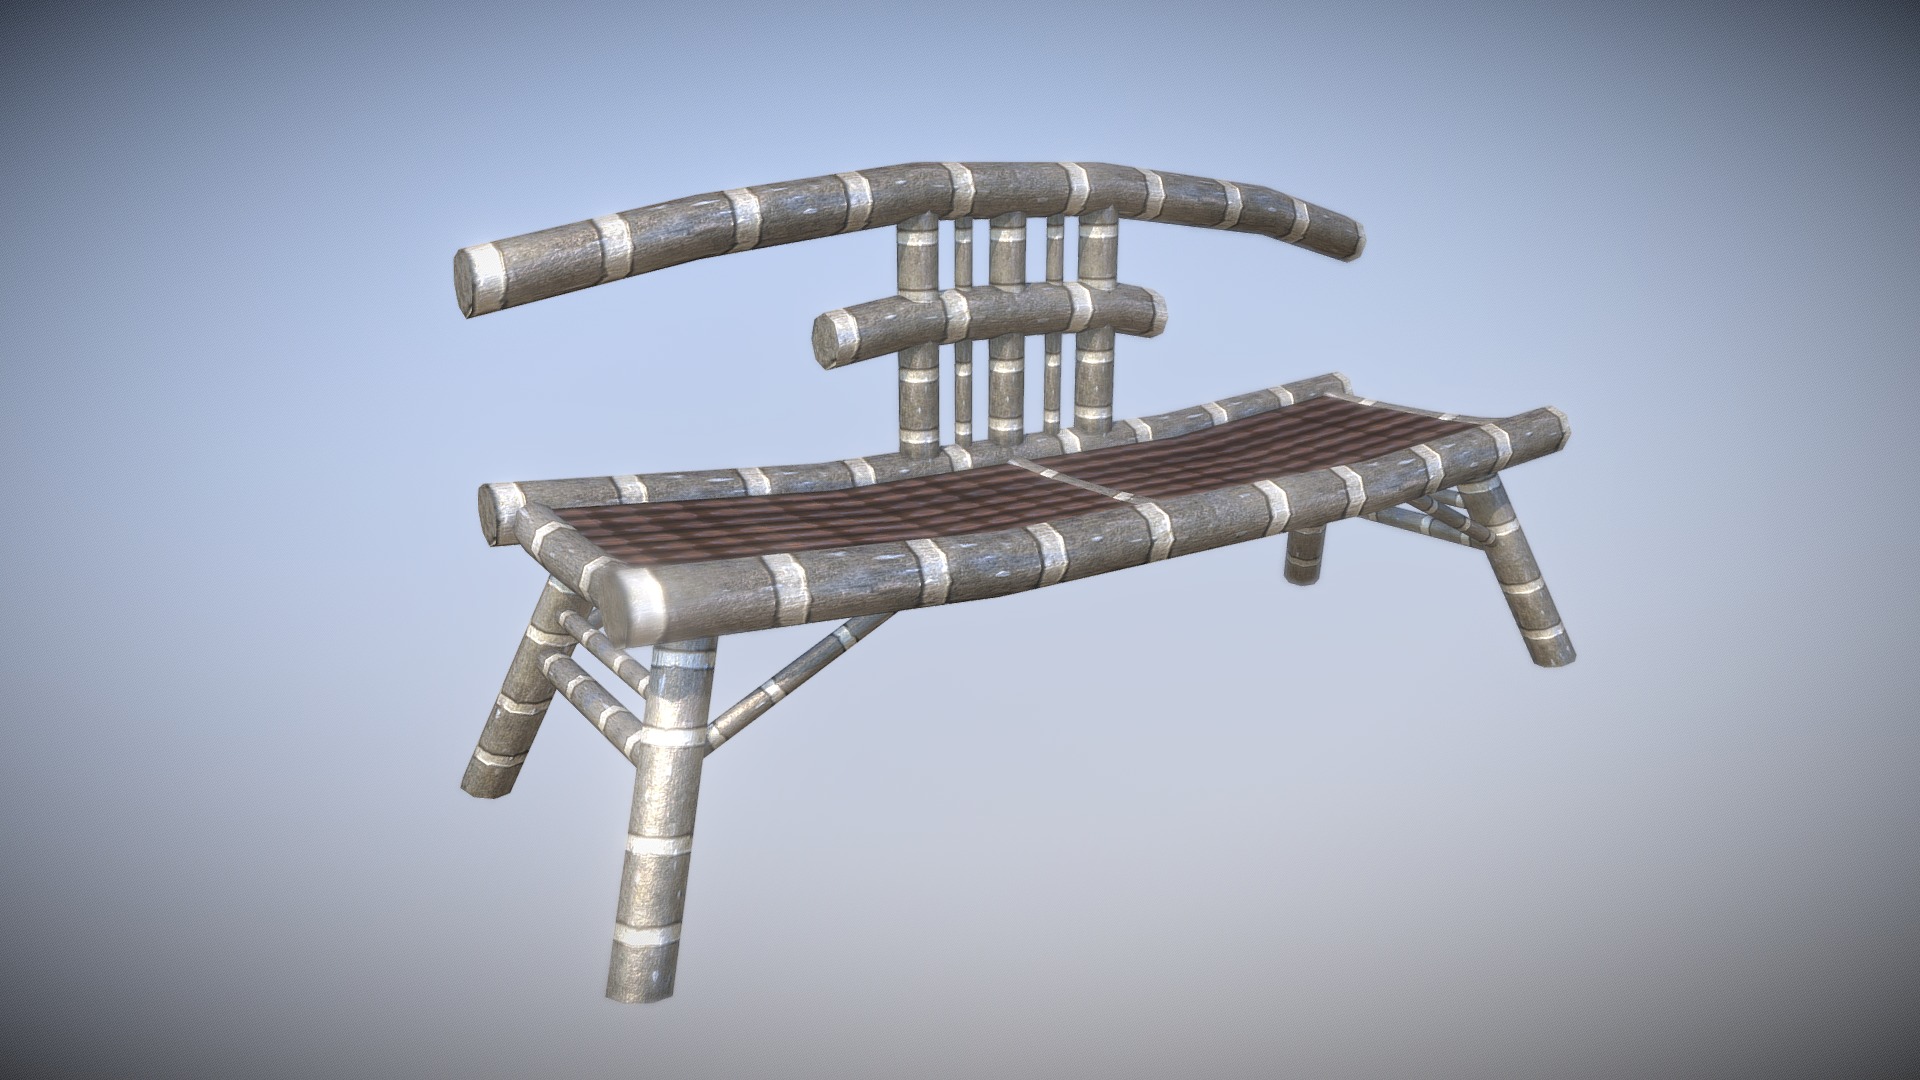 3D model Small Island – Bench - This is a 3D model of the Small Island - Bench. The 3D model is about a metal gun with a scope.